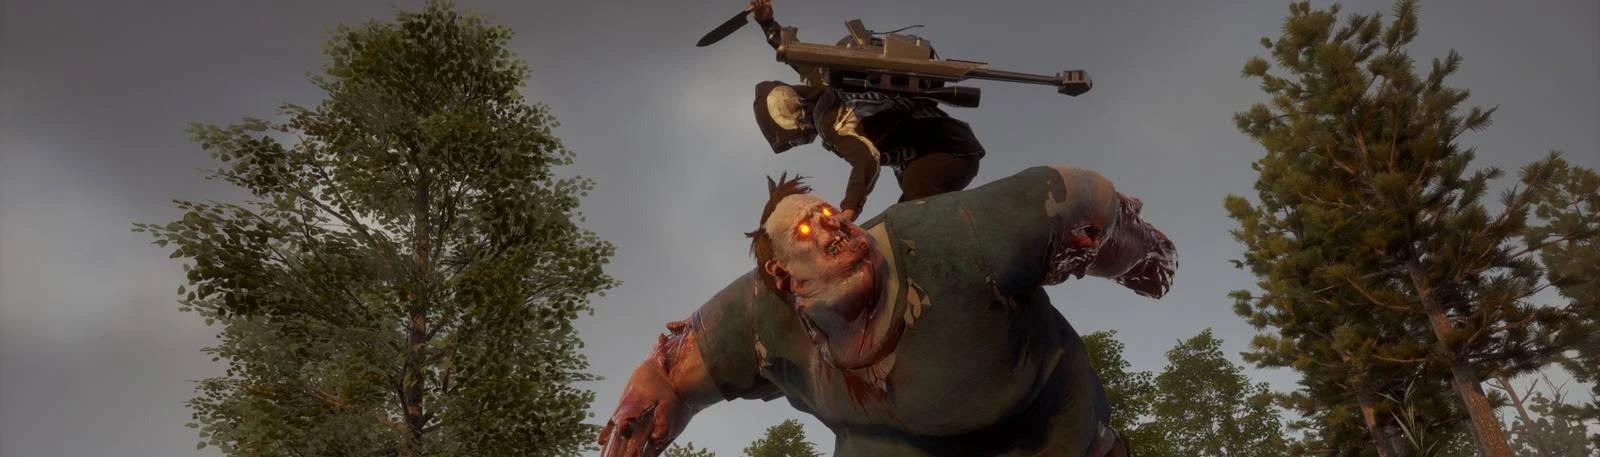 Stat of Decay 2 Juggernaut edition is perfection : r/StateOfDecay